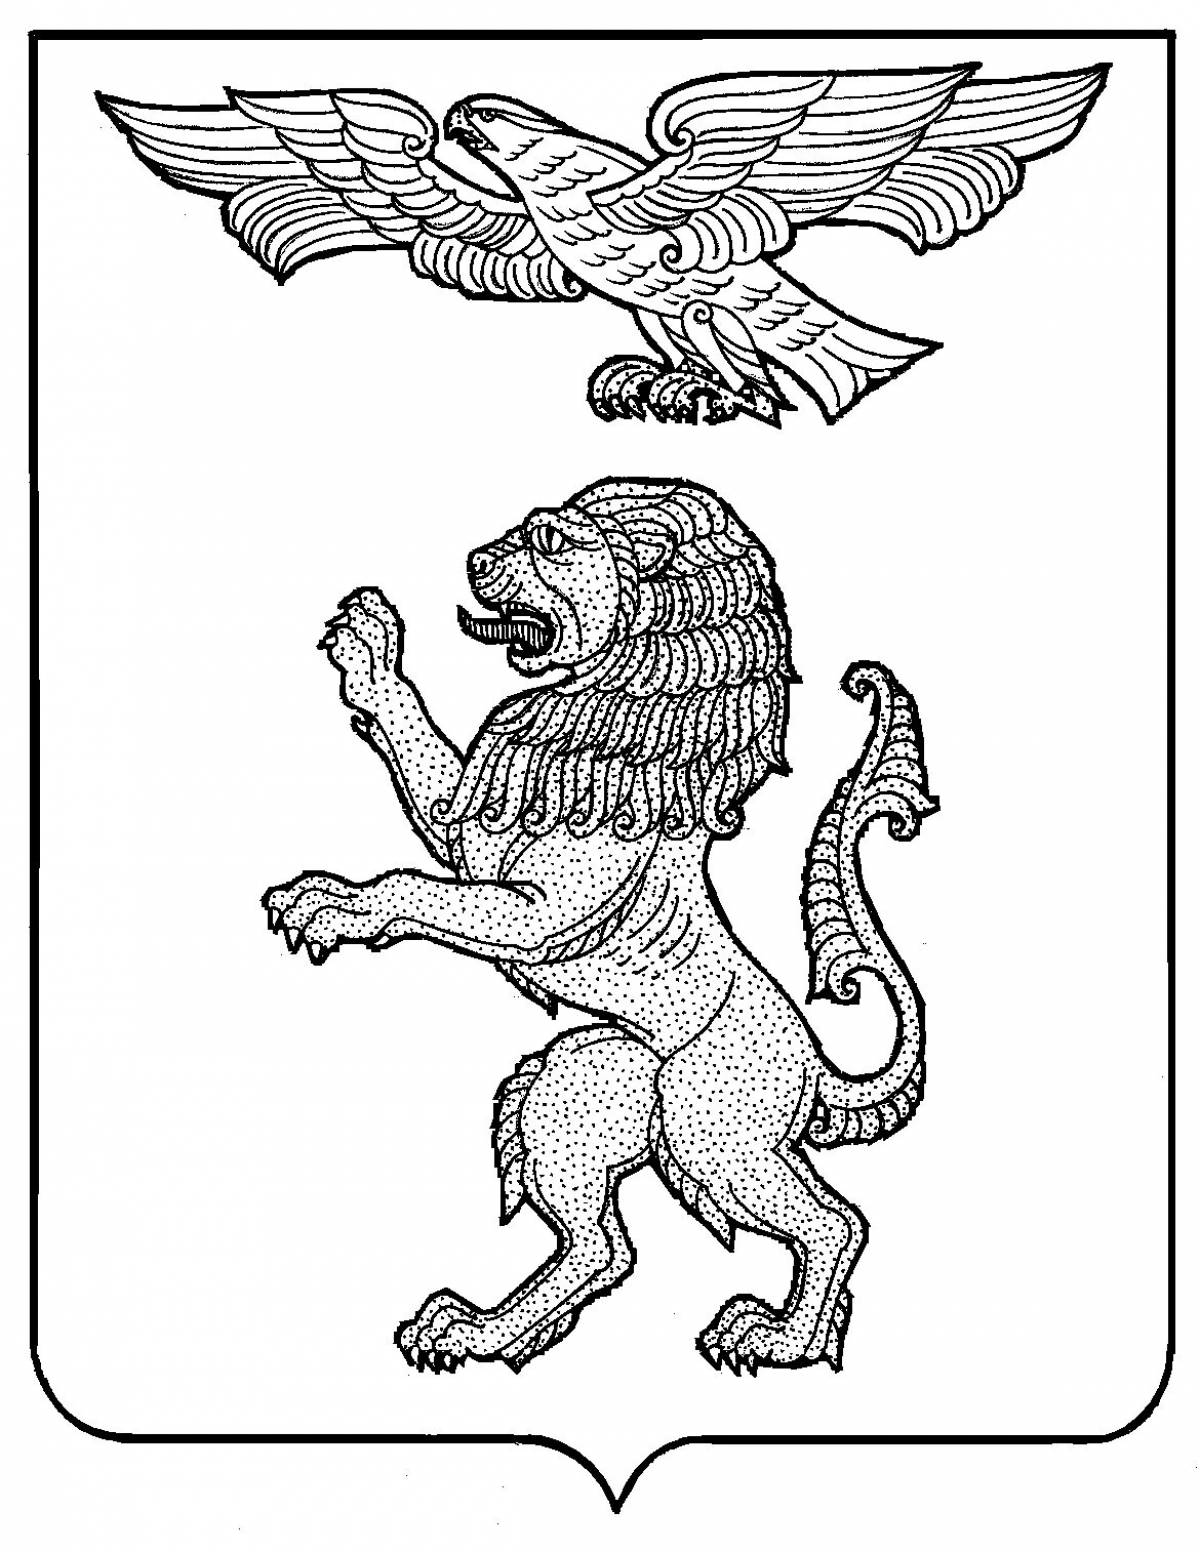 Coat of arms of the city of eagle #2